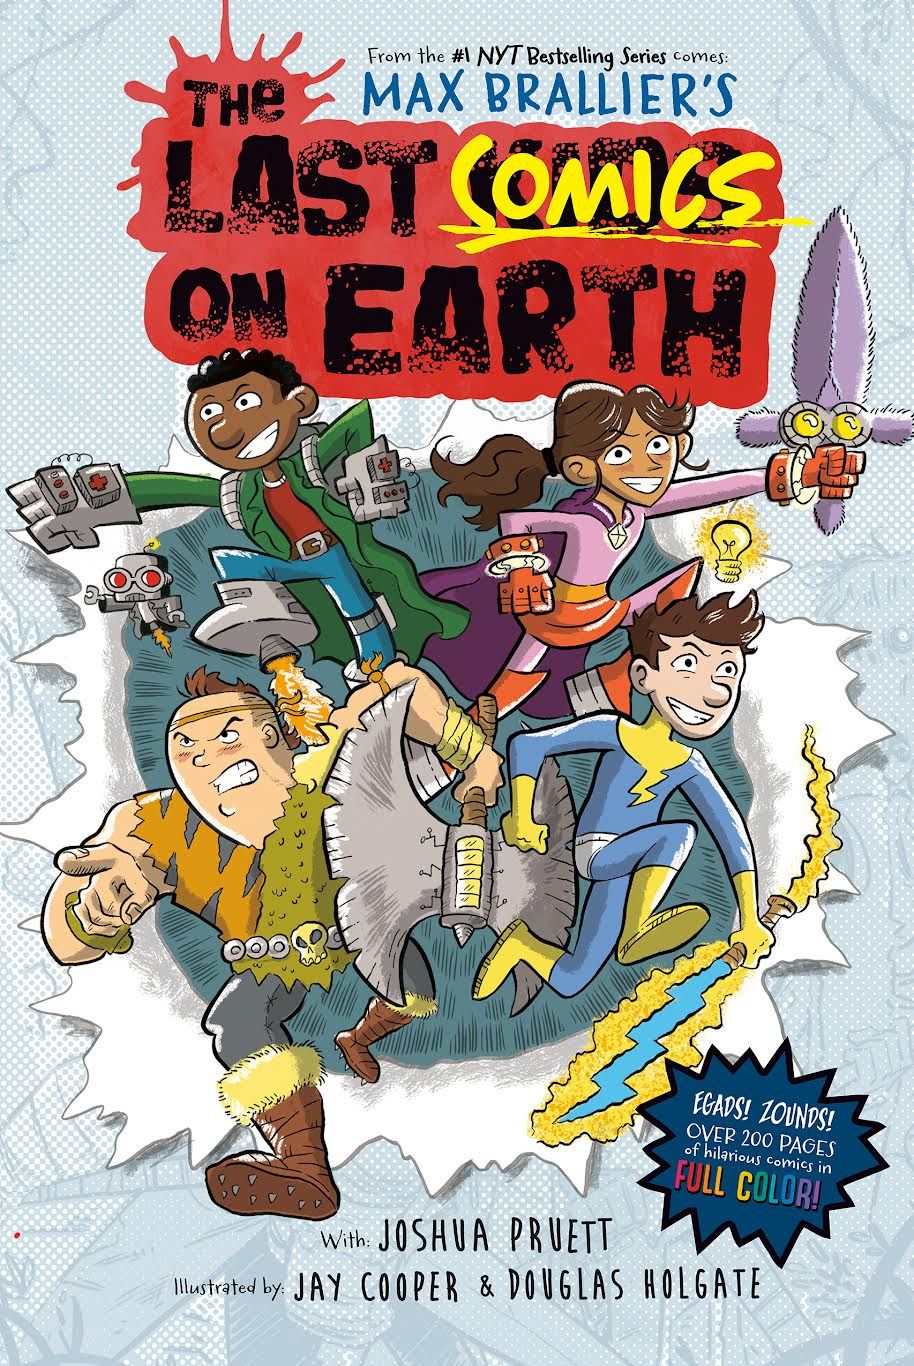 EXCLUSIVE: The Last Kids on Earth Returns for a New Spin-Off Series by Brallier and Pruett